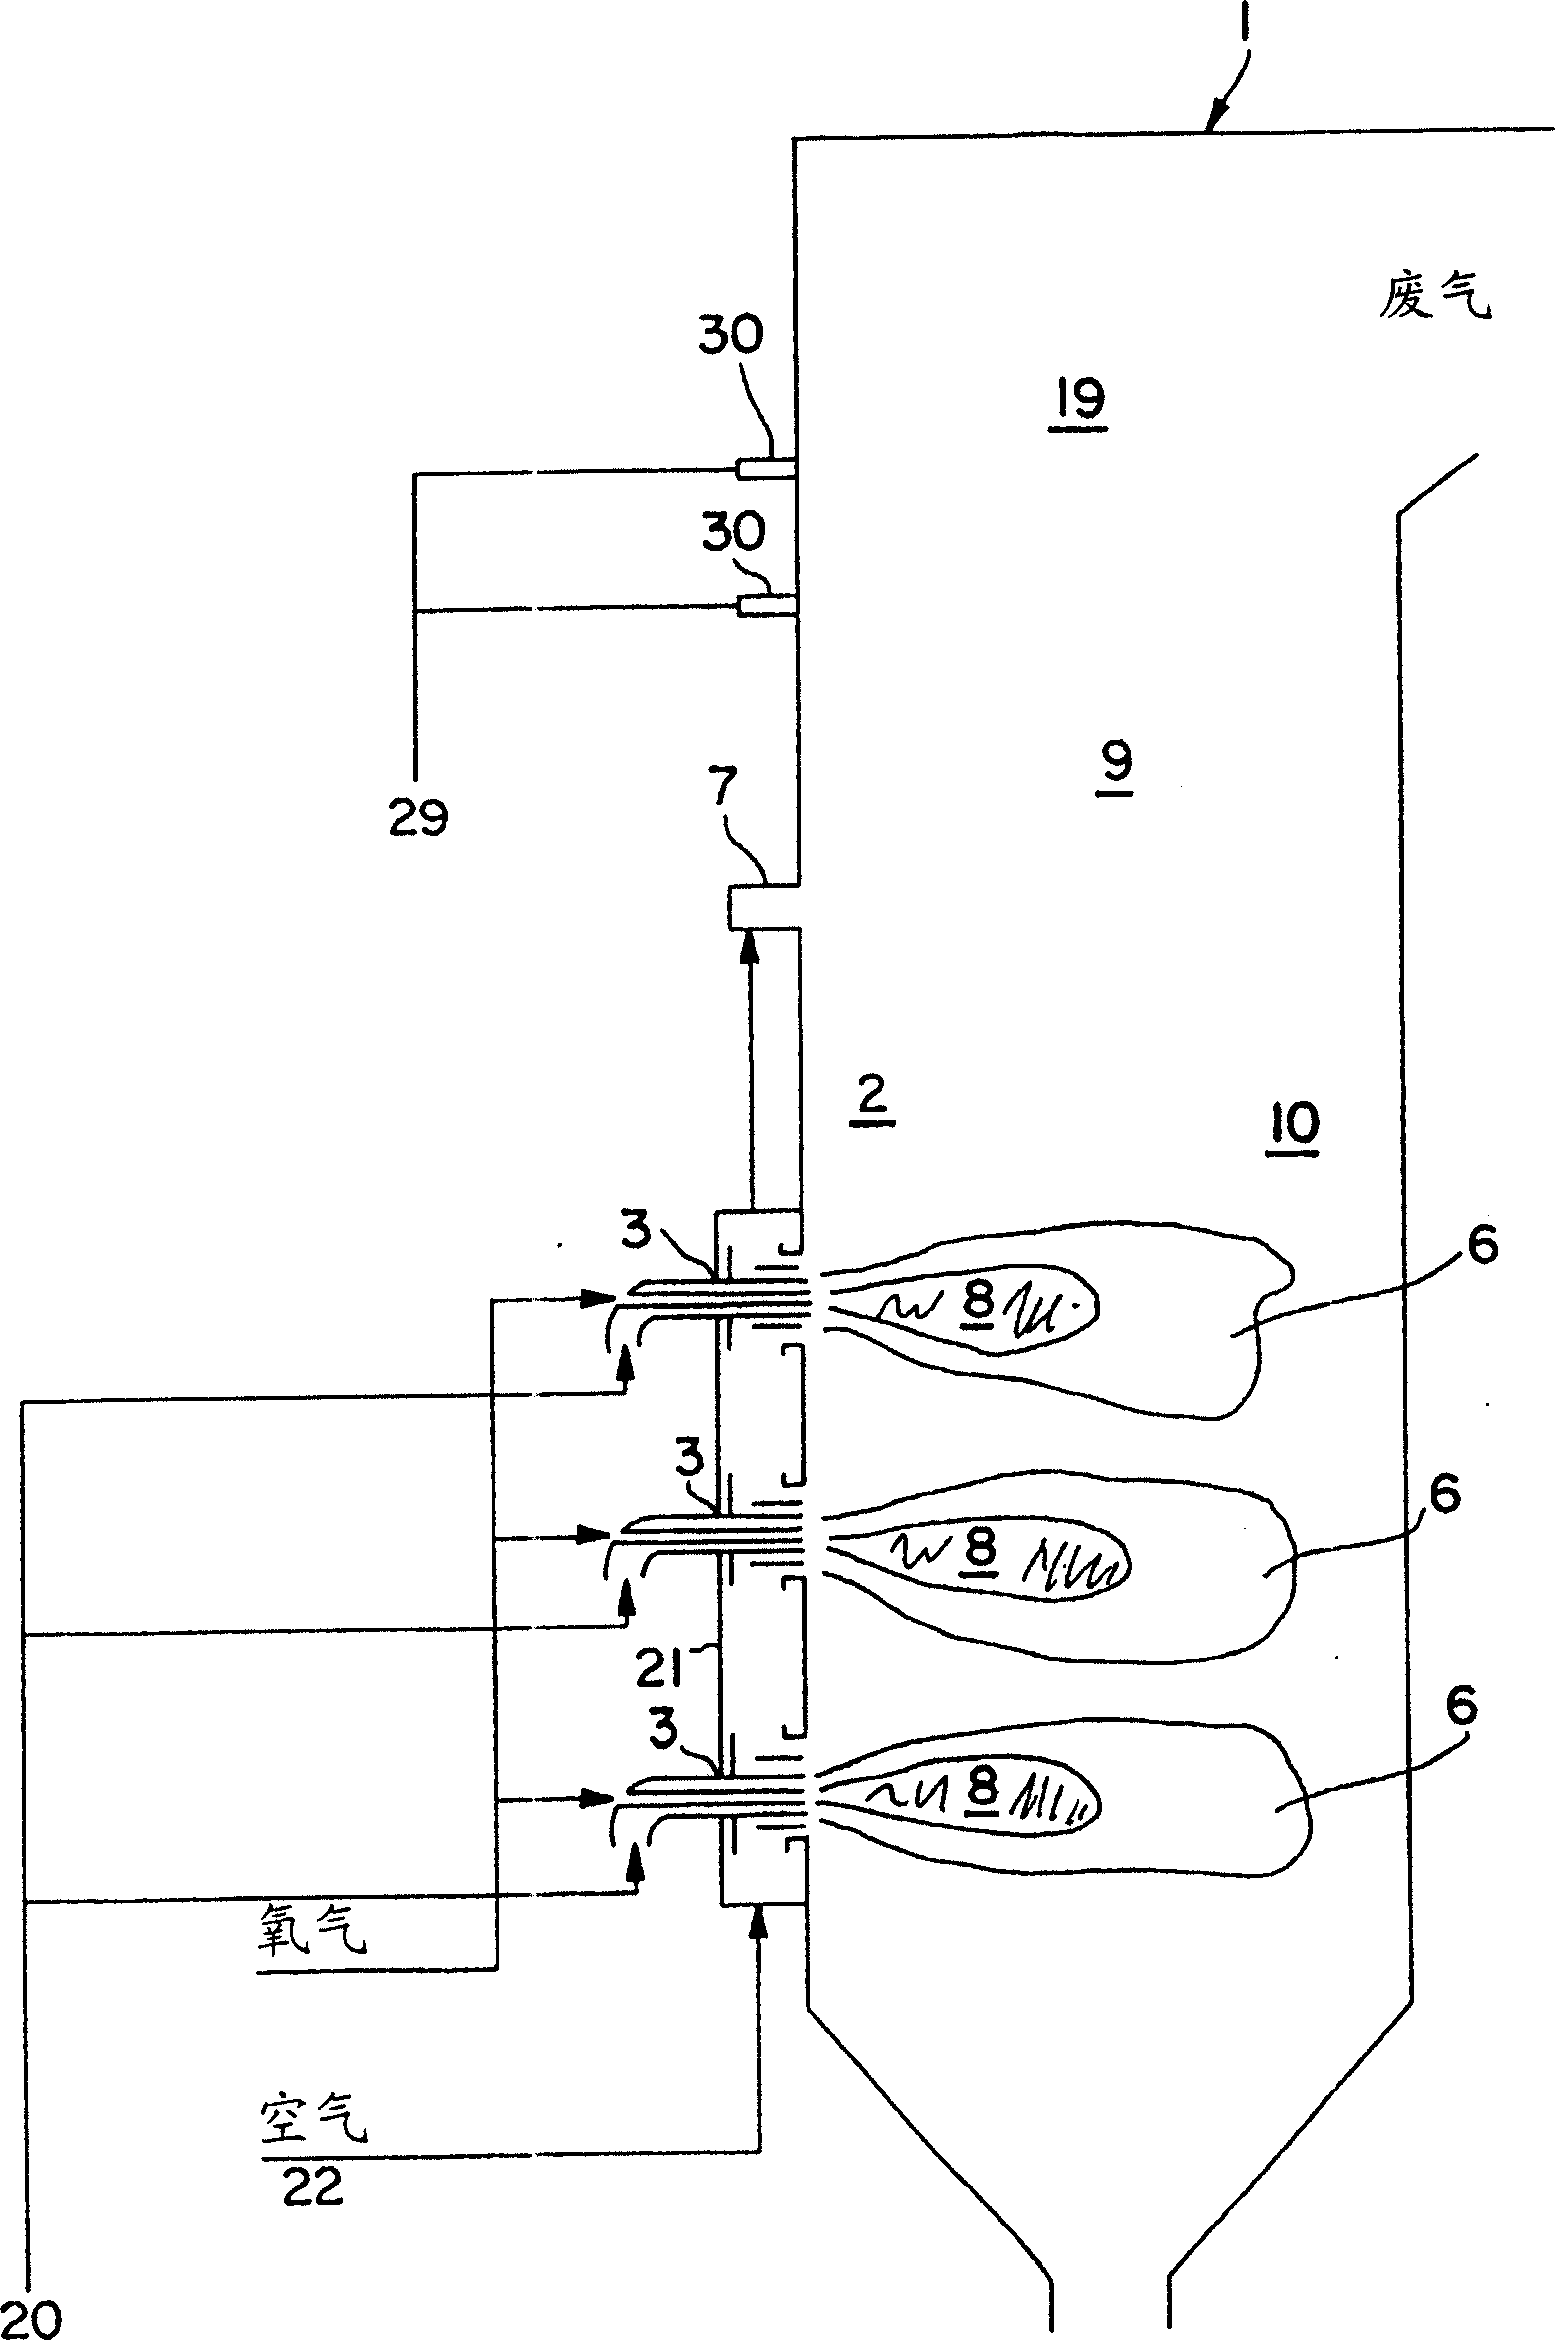 Enhancing SNCR-aided combustion with oxygen addition